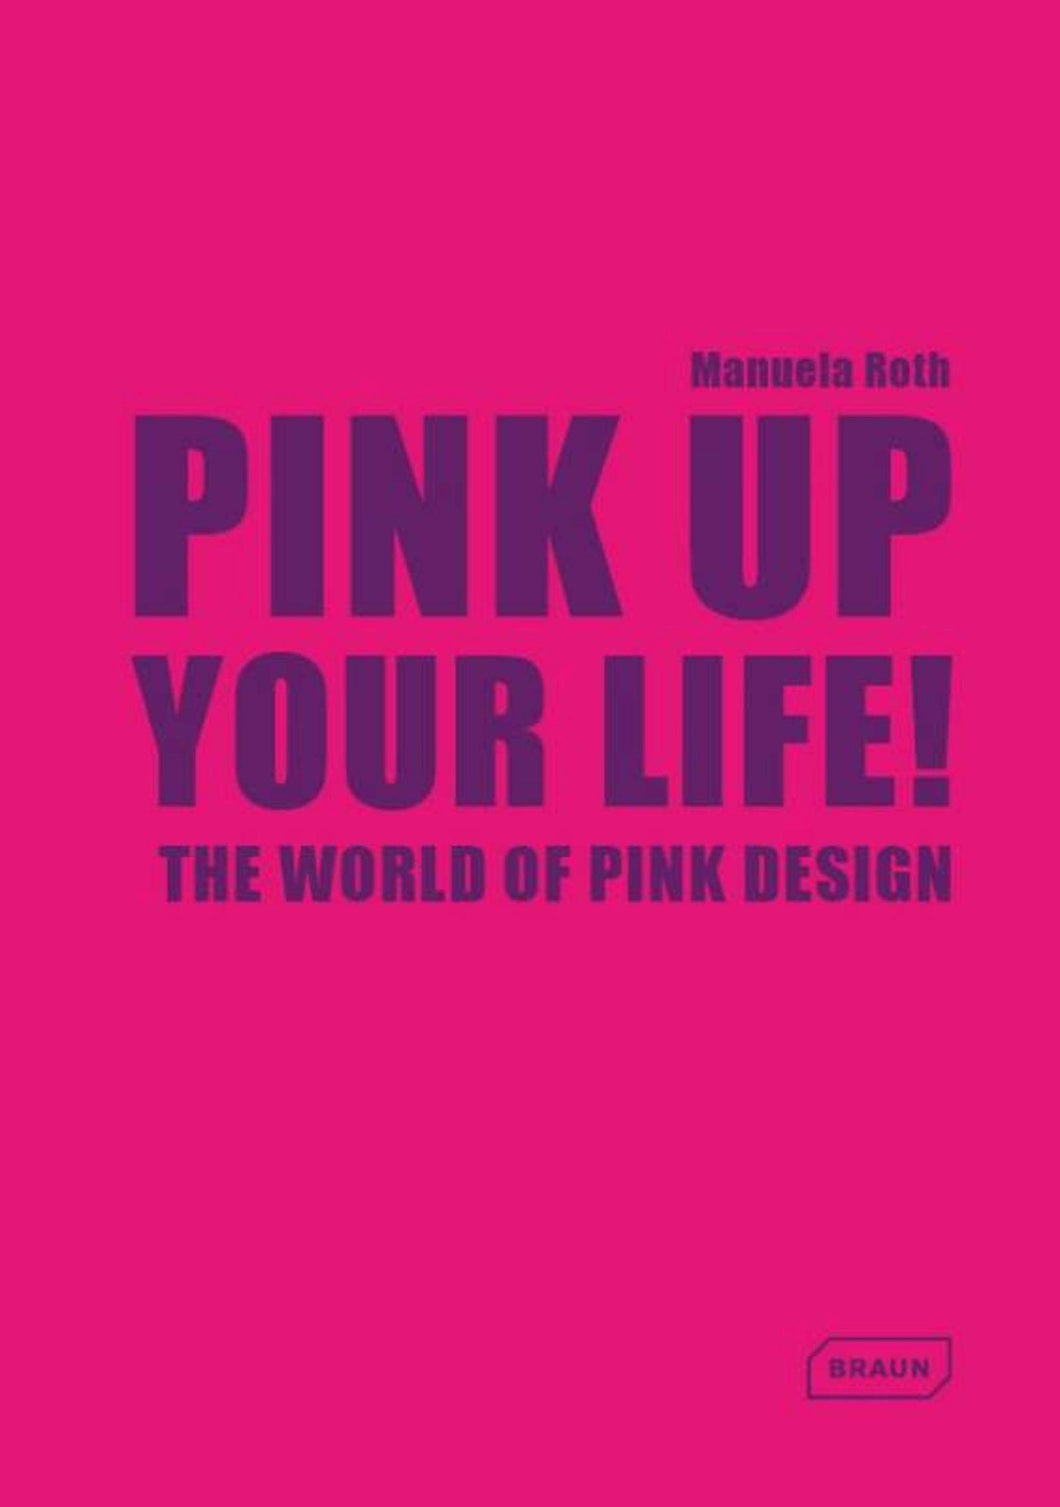 Pink Up Your Life!: The World of Pink Design